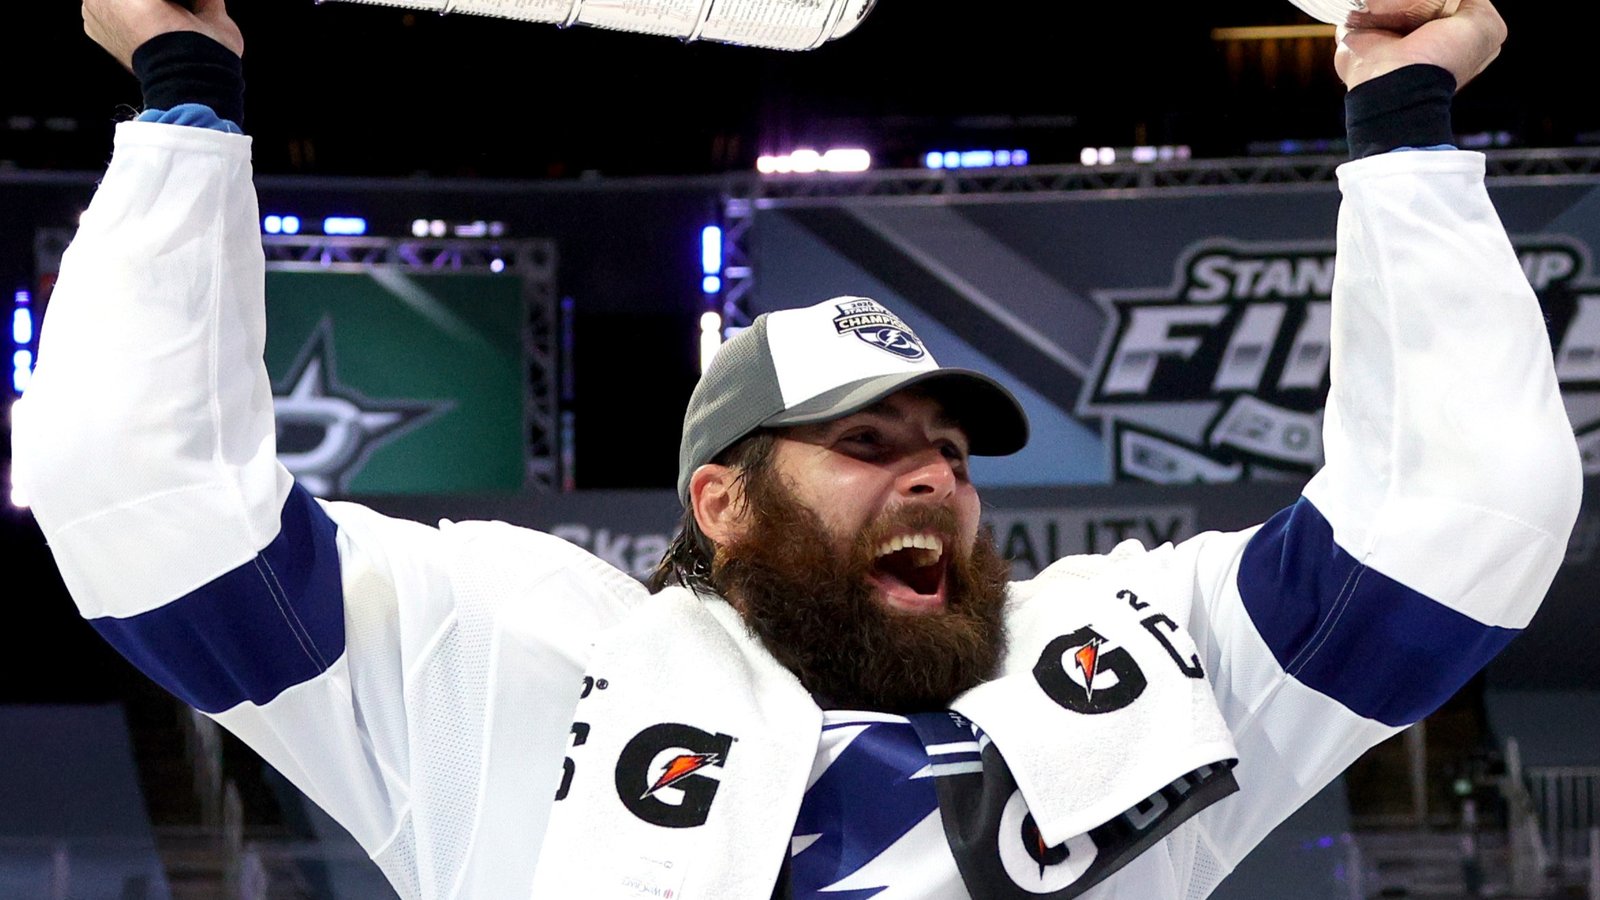 Pat Maroon promises to win third consecutive Stanley Cup in hilarious post! 